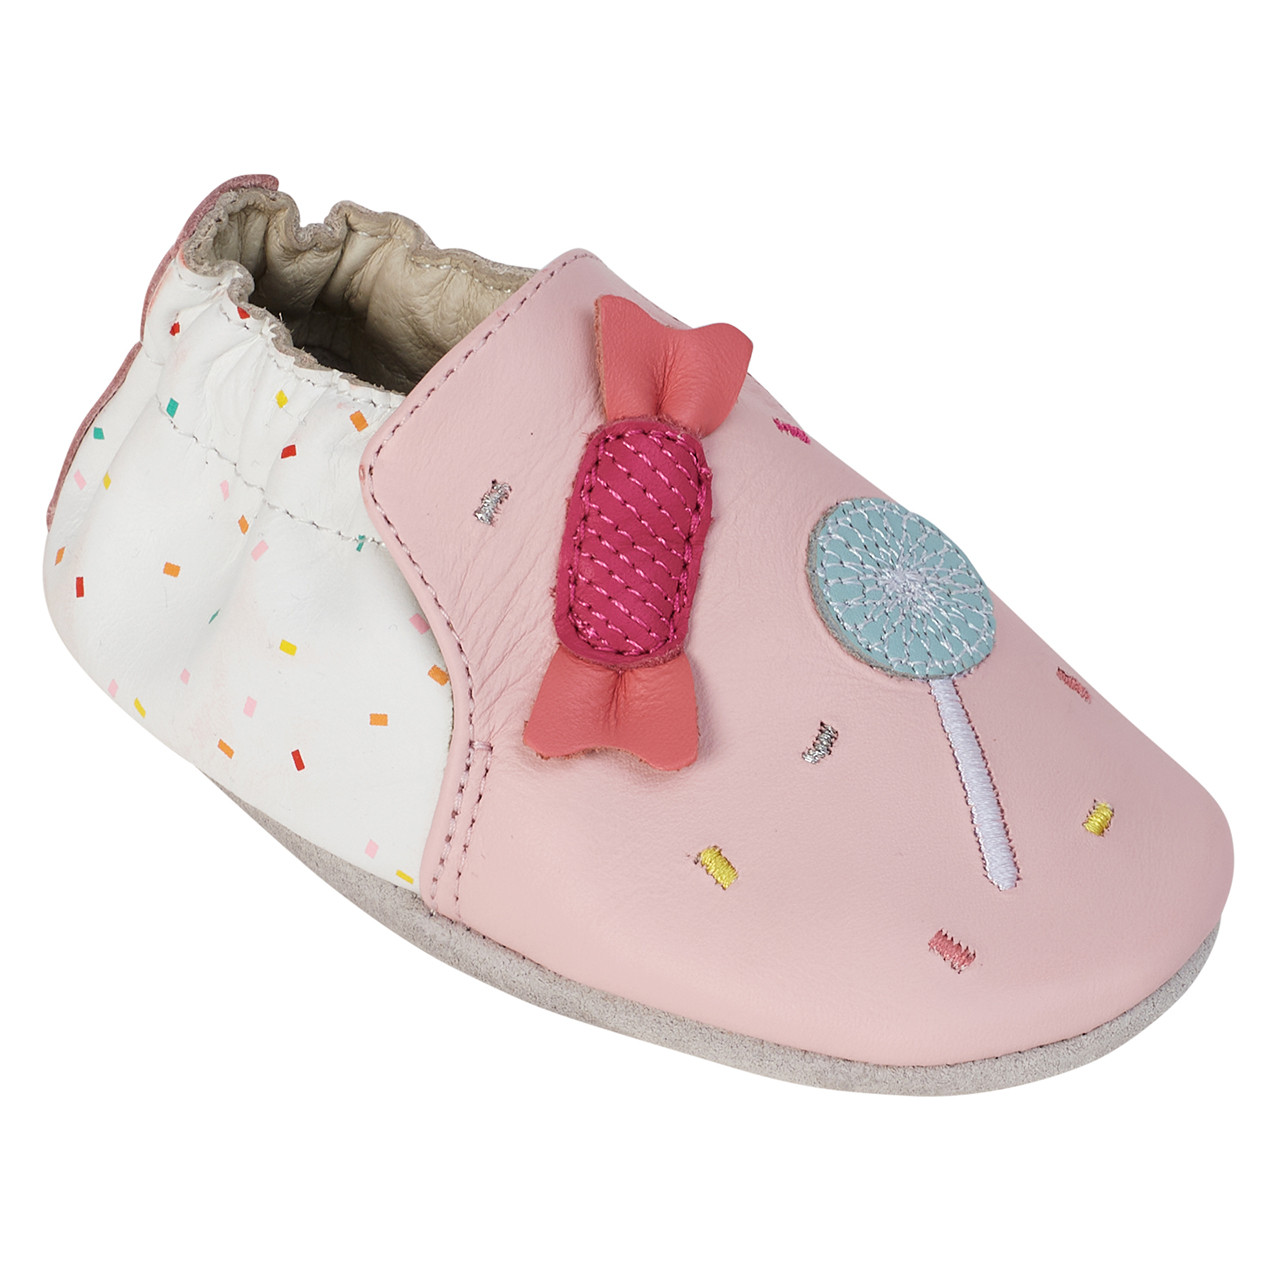 0-3 MONTHS ROBEEZ SWEET HEART SOFT SOLE BABY SHOES